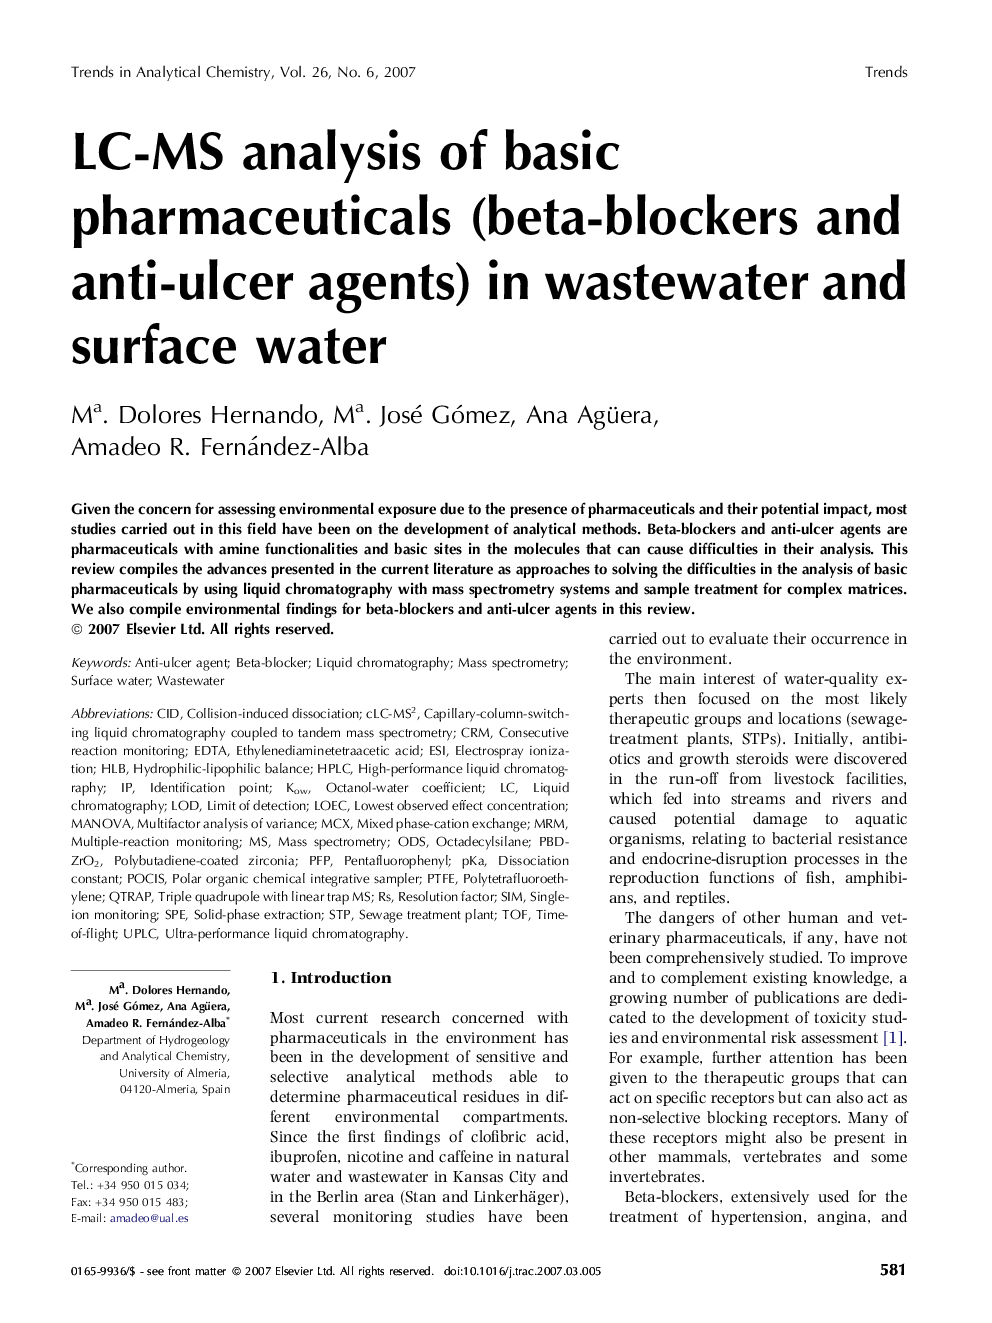 LC-MS analysis of basic pharmaceuticals (beta-blockers and anti-ulcer agents) in wastewater and surface water